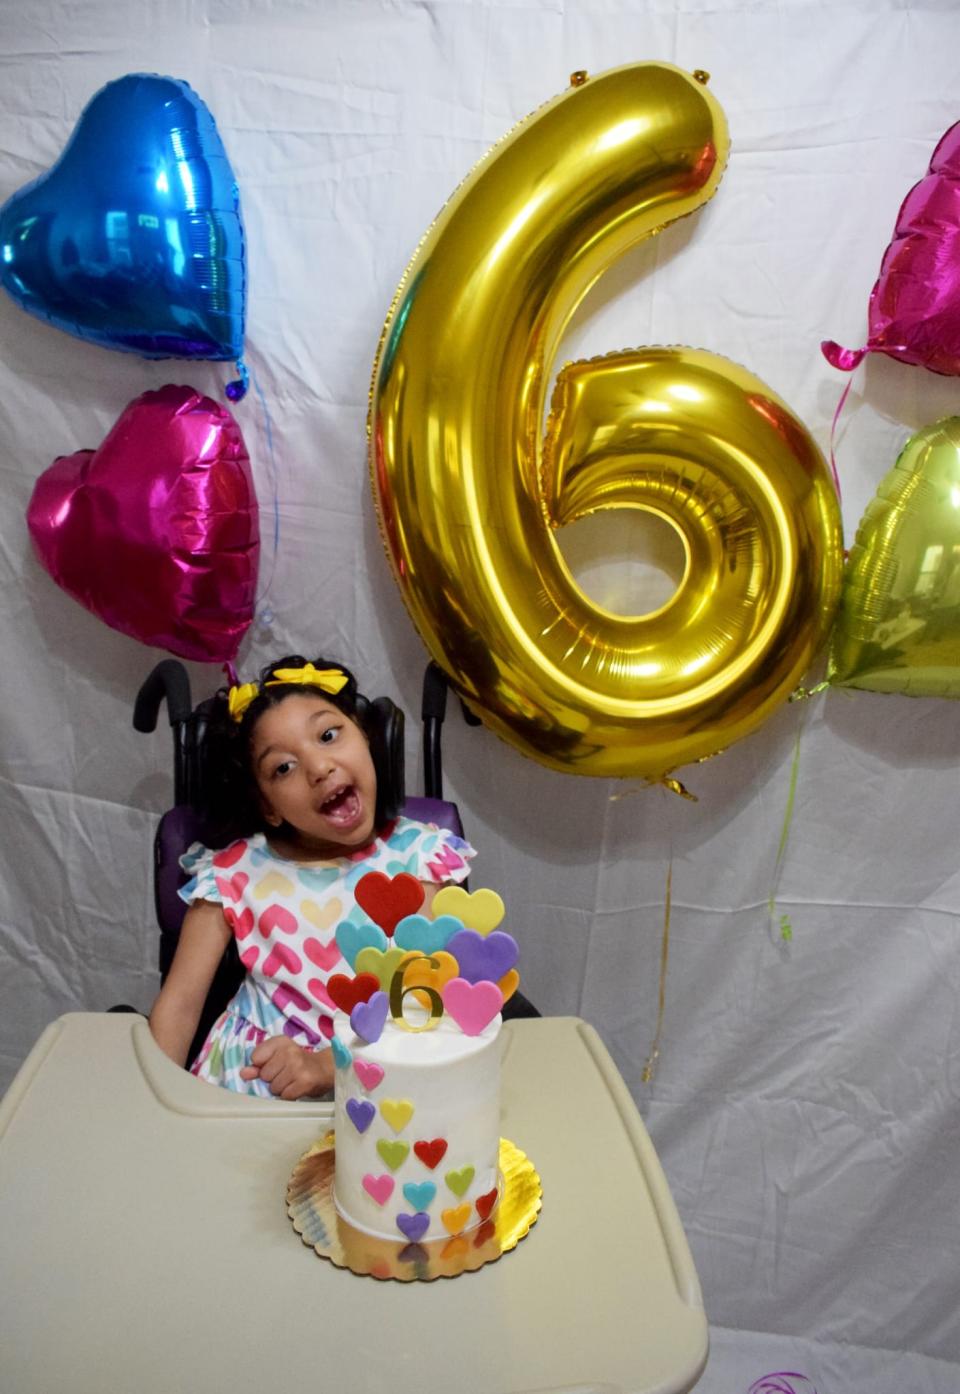 Darah Girón Funes, the first child born in the continental U.S. with the effects of Zika virus, celebrates her sixth birthday at her home in Bayonne, N.J., on May 31, 2022.